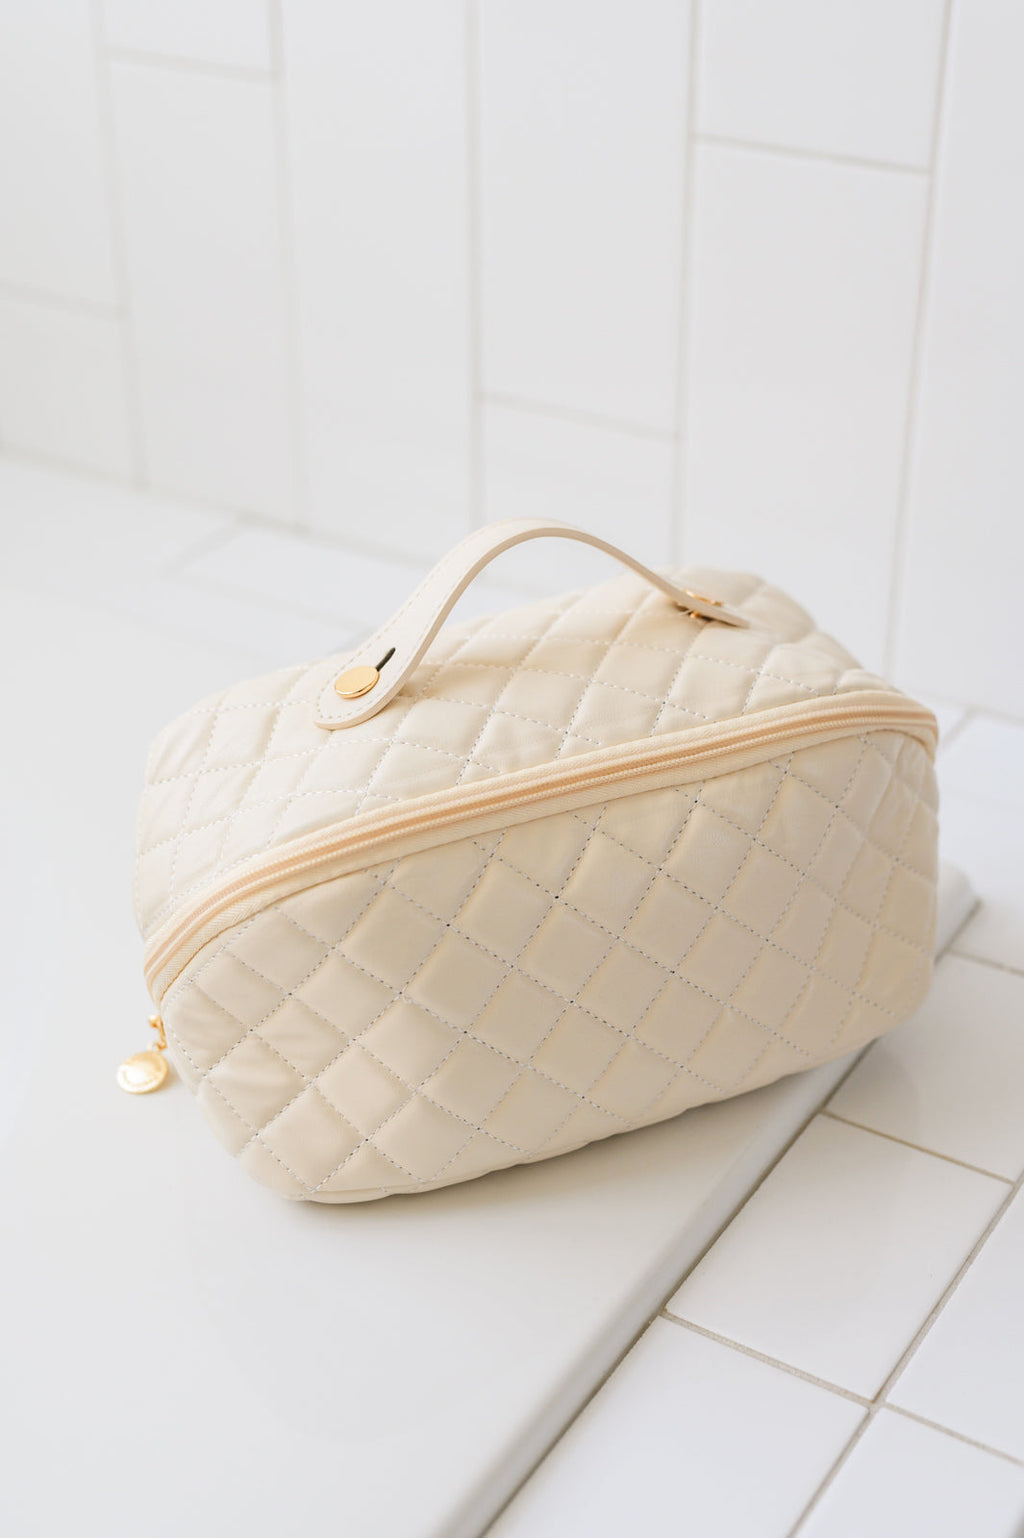 Expanding Quilted Vegan Leather Makeup Bag in Cream